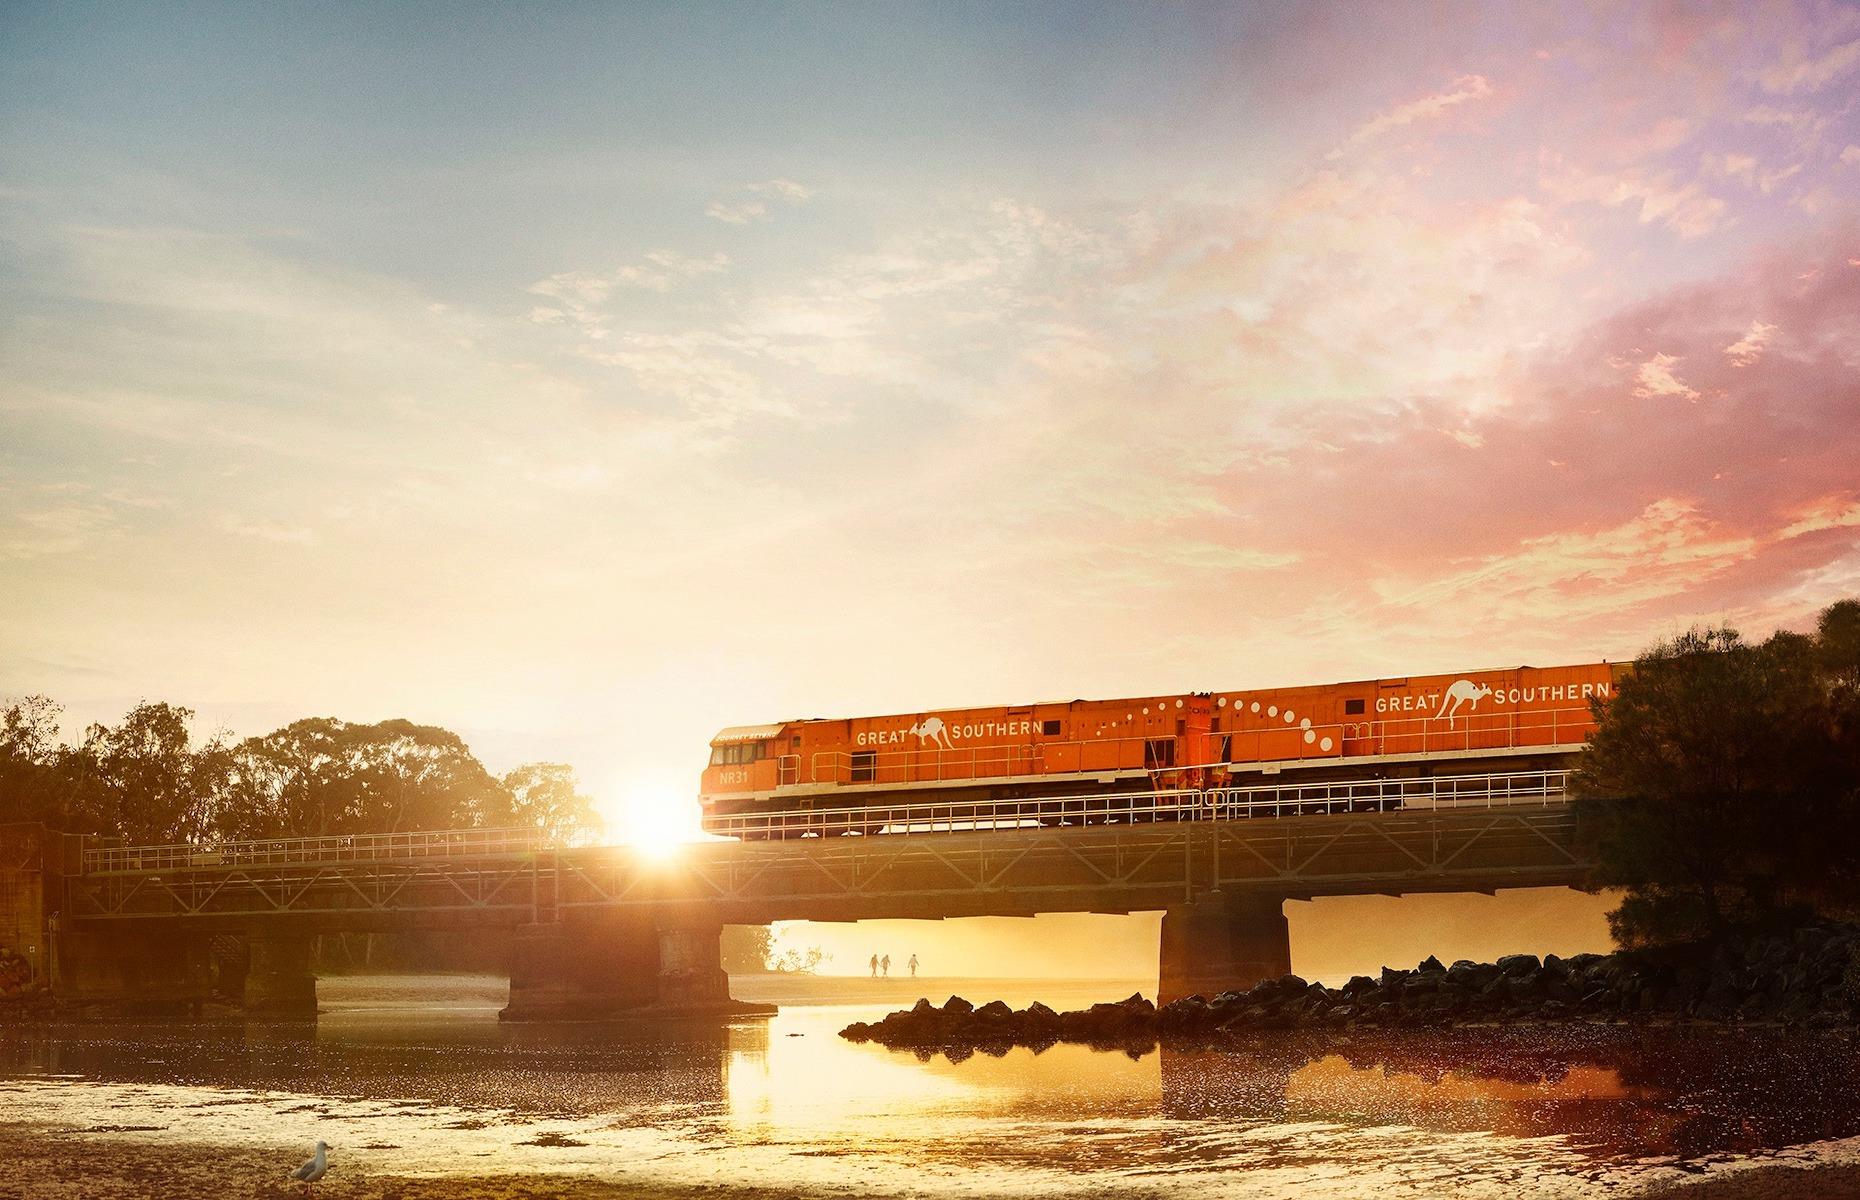 <p>Australia's newest luxury long-distance train journey, Great Southern takes its passengers on a magnificent trip to explore the east and southern coasts of mainland Australia. Running between Brisbane and Adelaide, the luxurious bright orange train travels past rugged coastlines, sun-kissed beaches and forested peaks over a course of three days and two nights. </p>